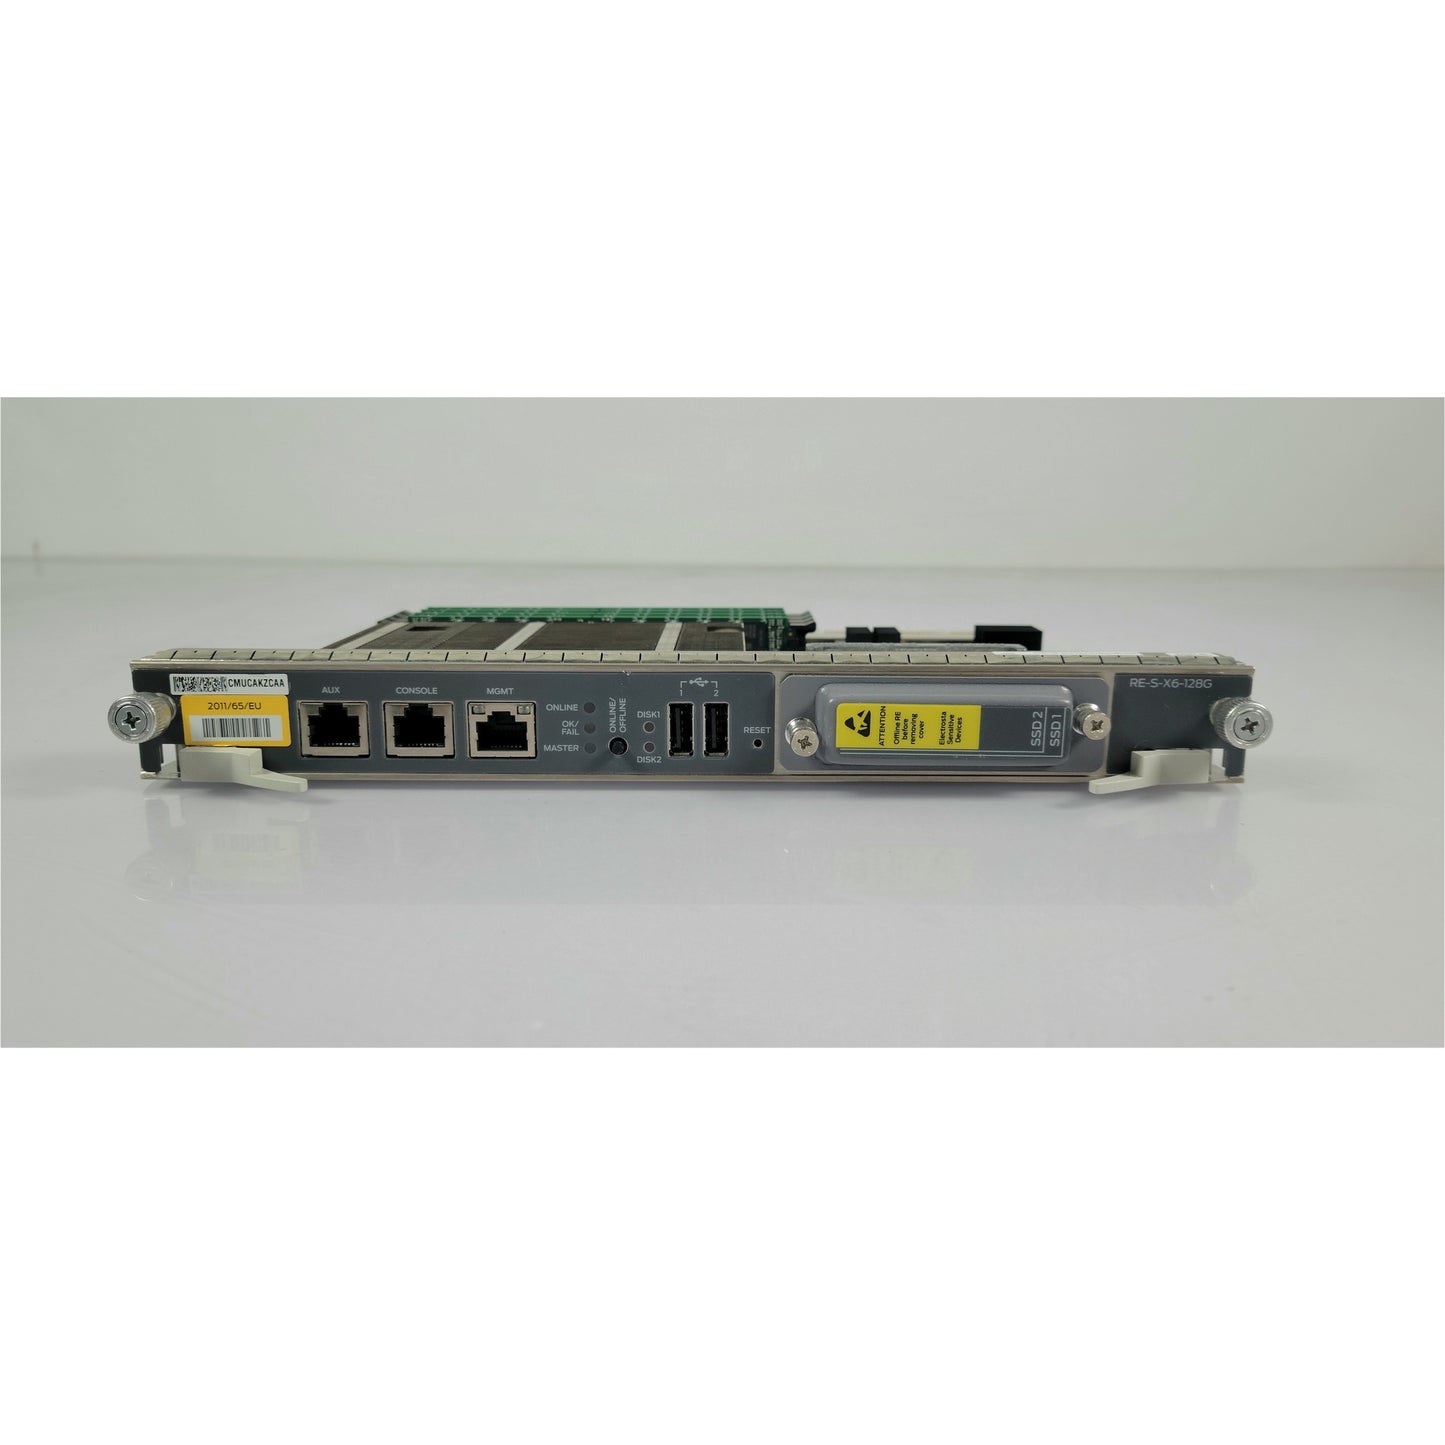 Juniper RE-S-X6-128G Core 2.0GHz RE w/128G Memory (Used - Good)